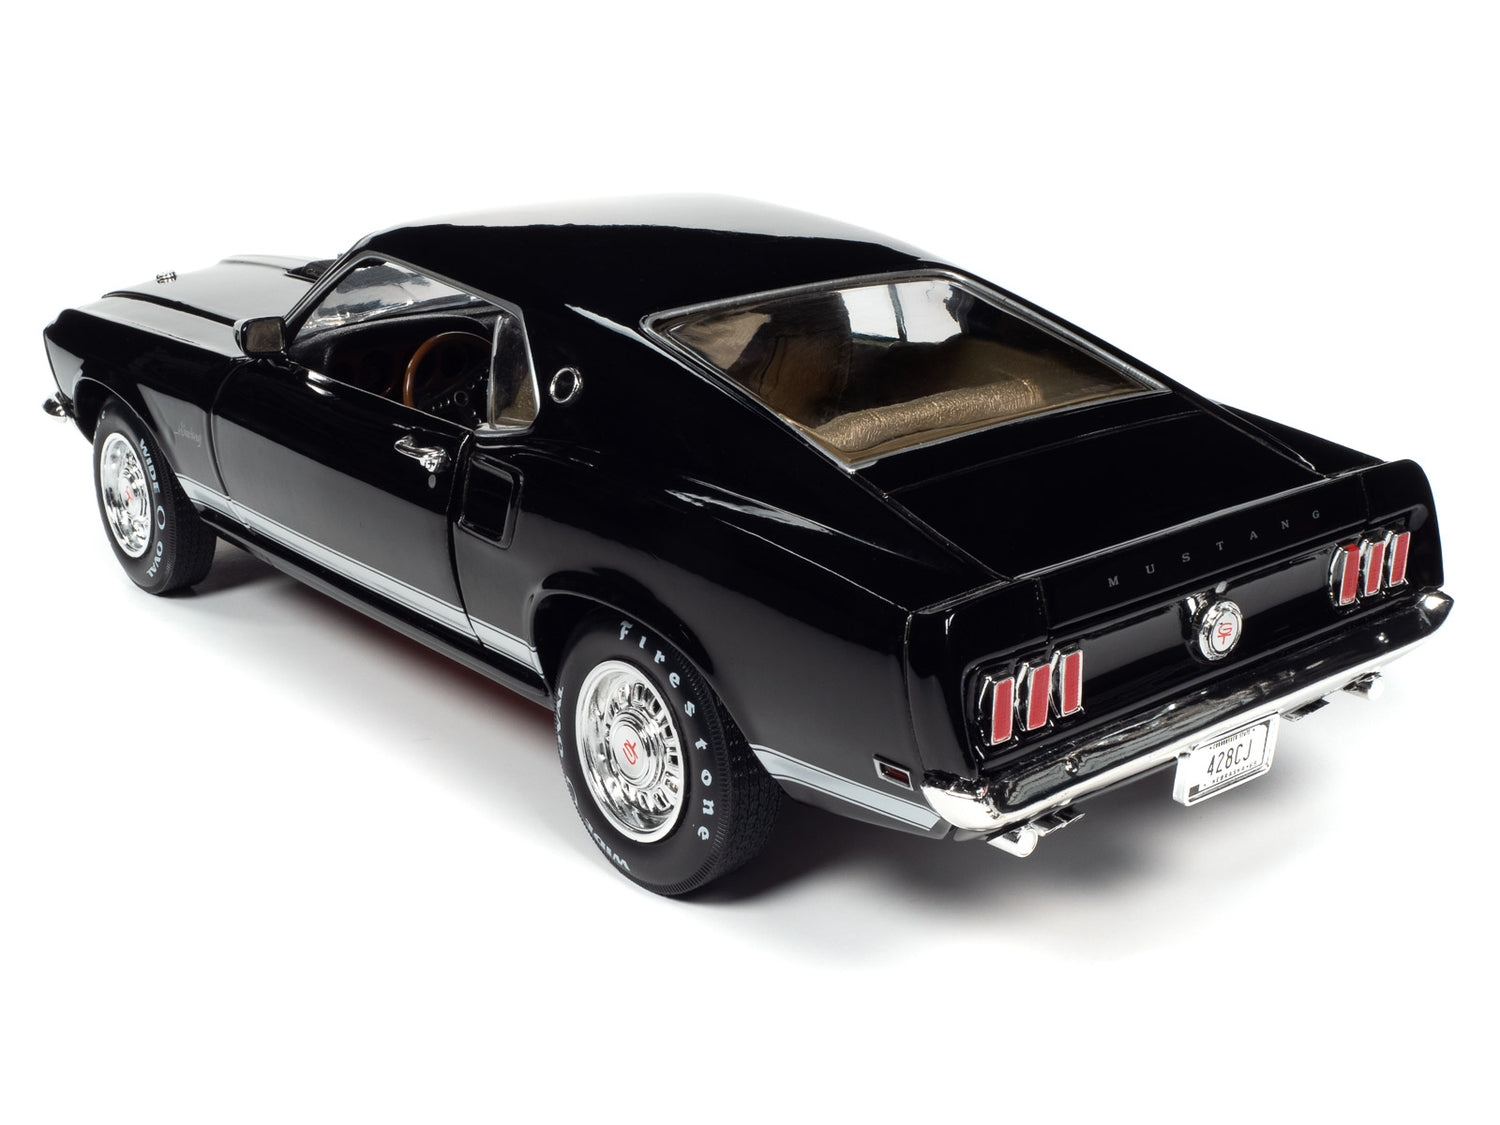 American Muscle 1969 Mustang GT 2+2 1:18 Scale Diecast